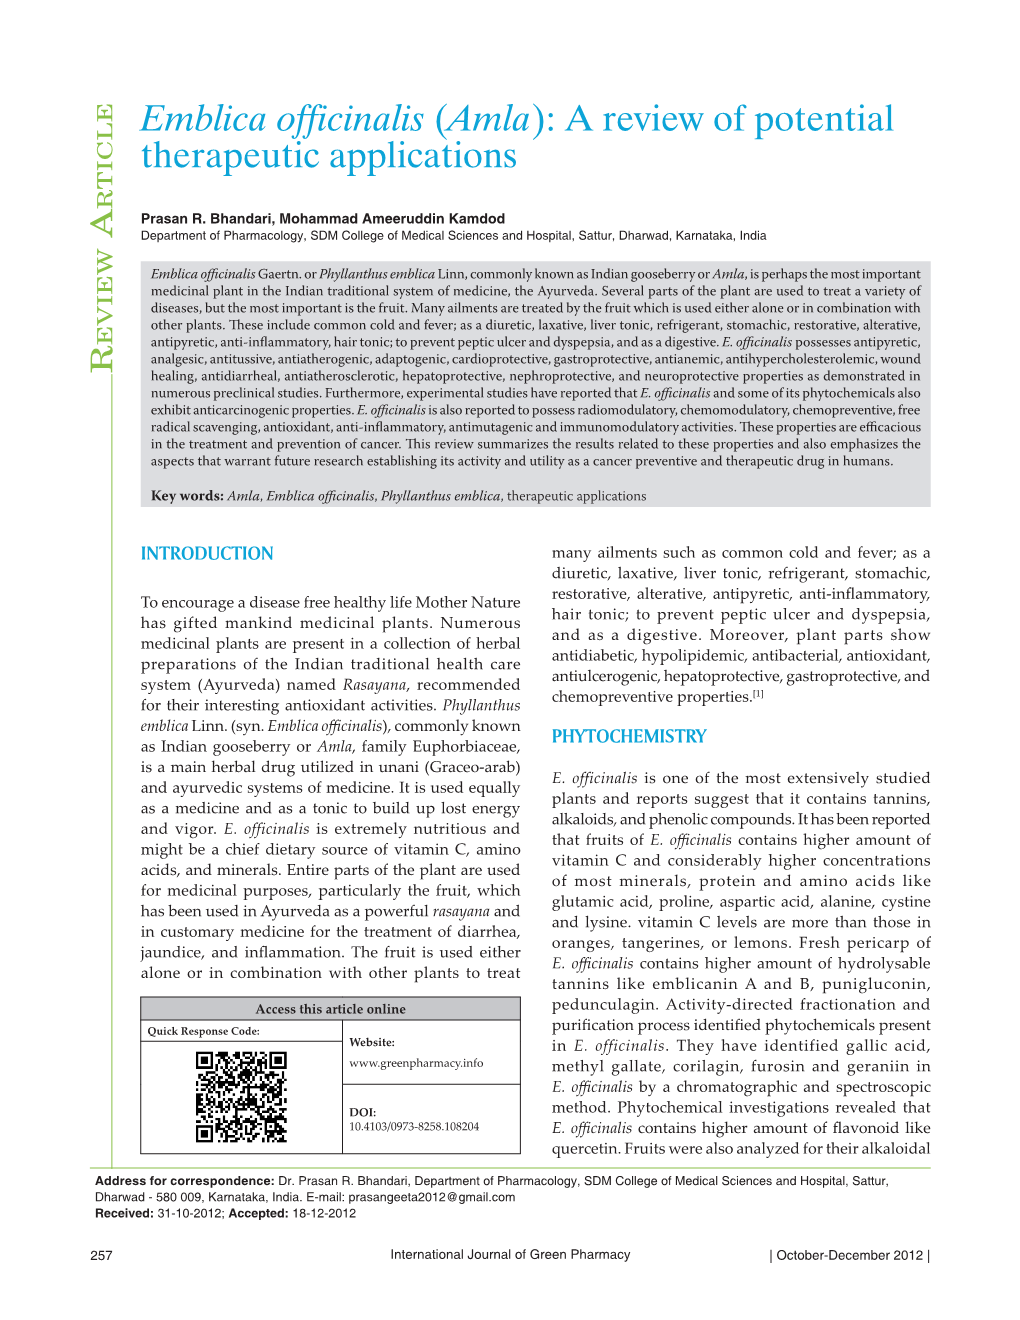 Emblica Officinalis (Amla): a Review of Potential Therapeutic Applications R Ticle Prasan R